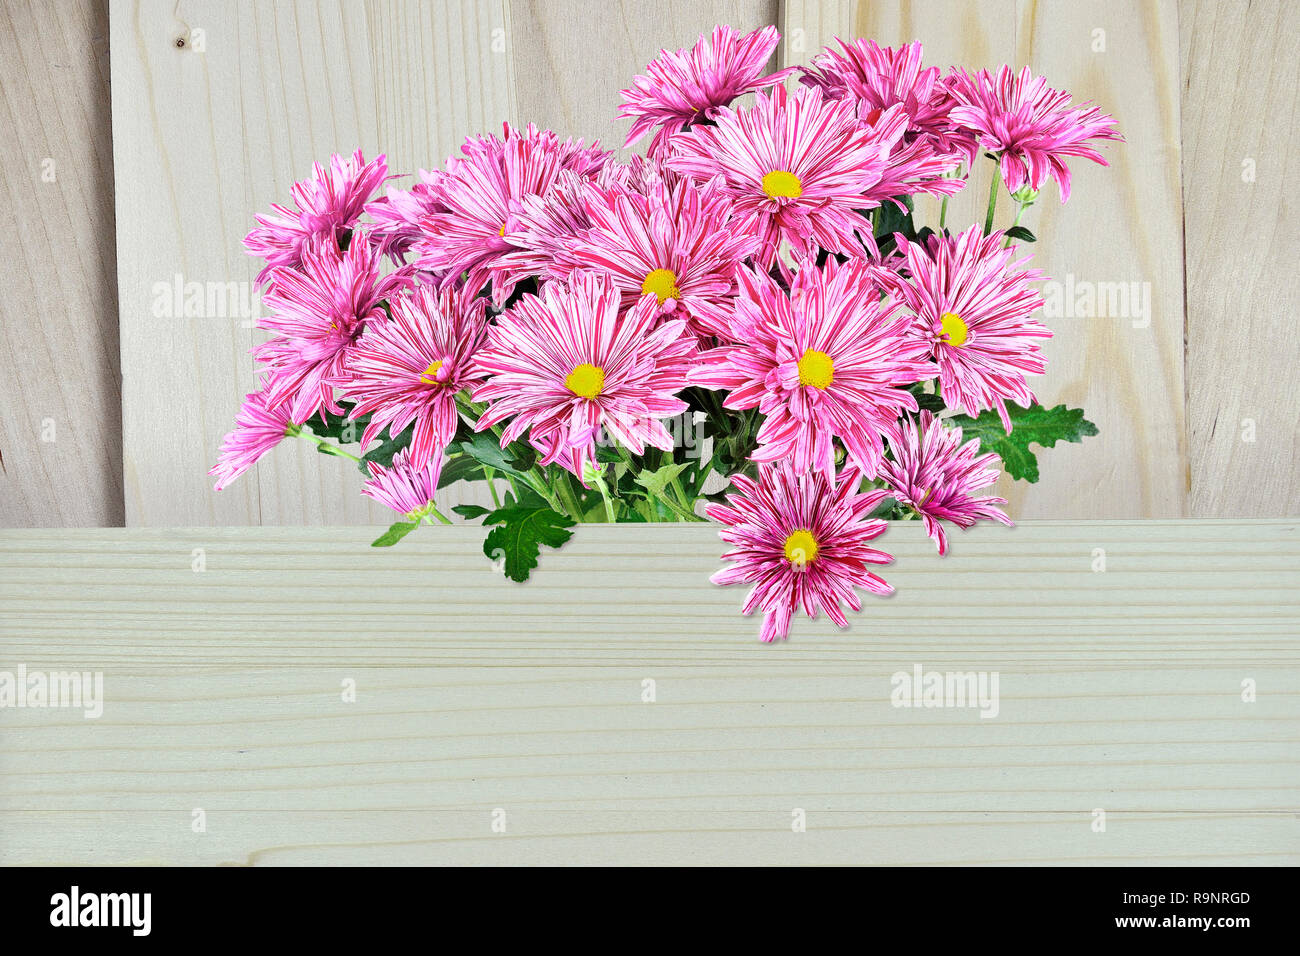 Bouquet of pink chrysanthemum flowers with striped petals close up, on light wooden background with space for text. Holiday greeting card template for Stock Photo